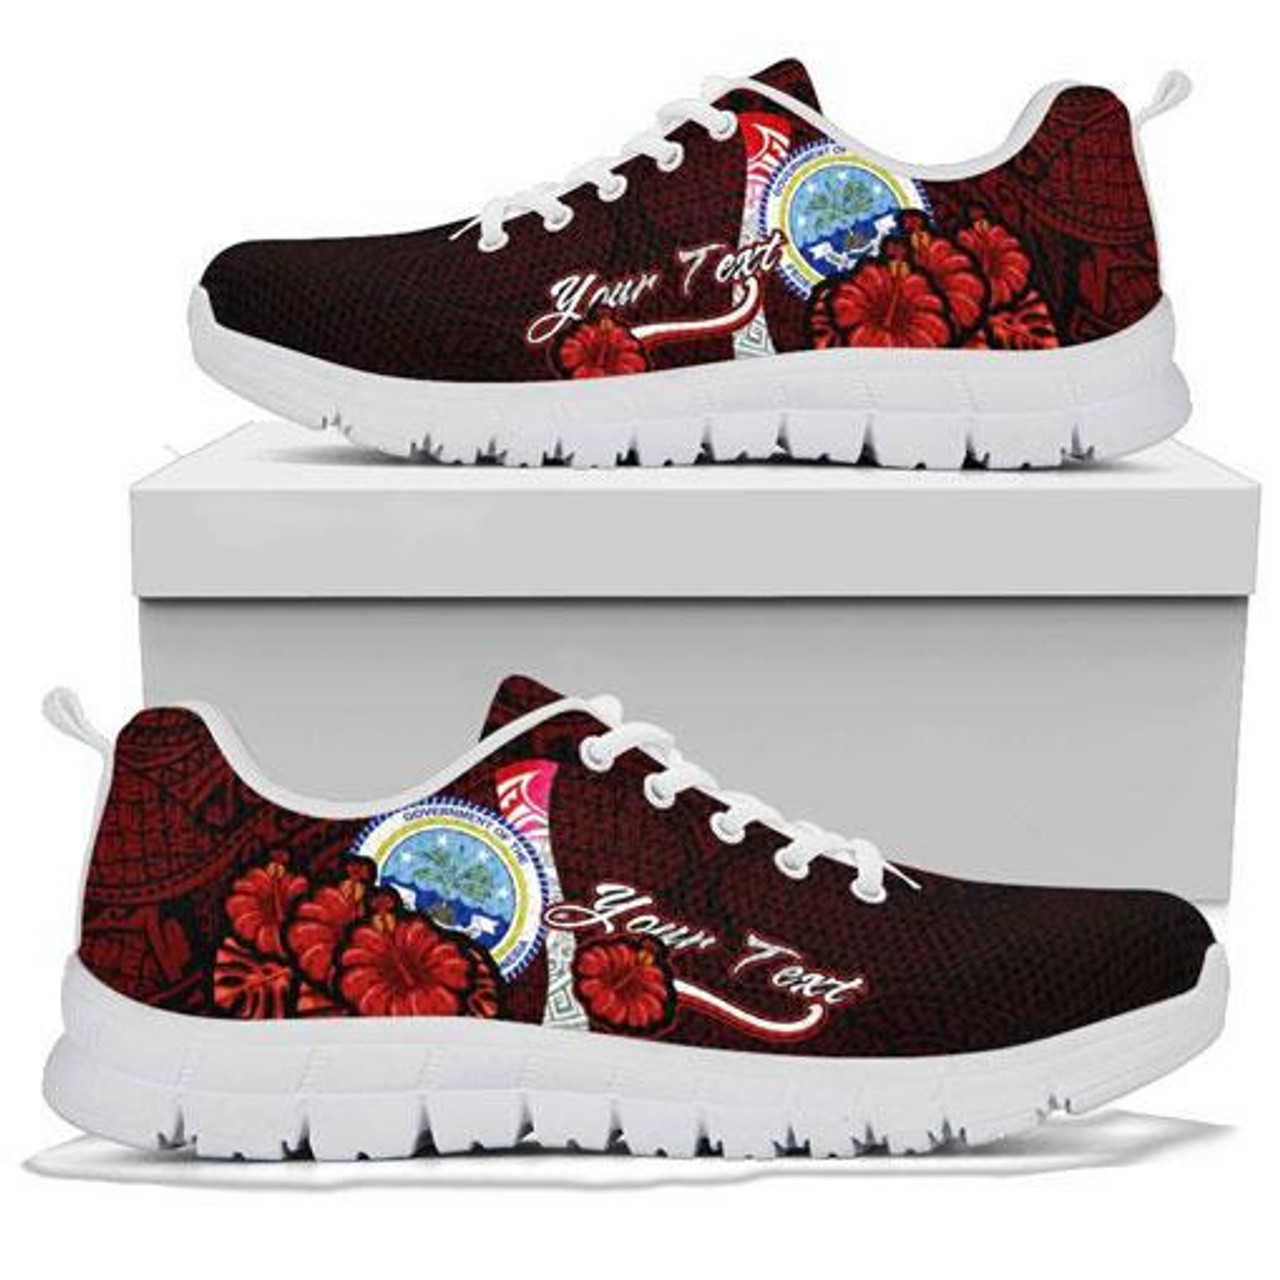 Federated States Of Micronesia Custom Personalised Sneakers - Coat Of Arm With Hibiscus 8